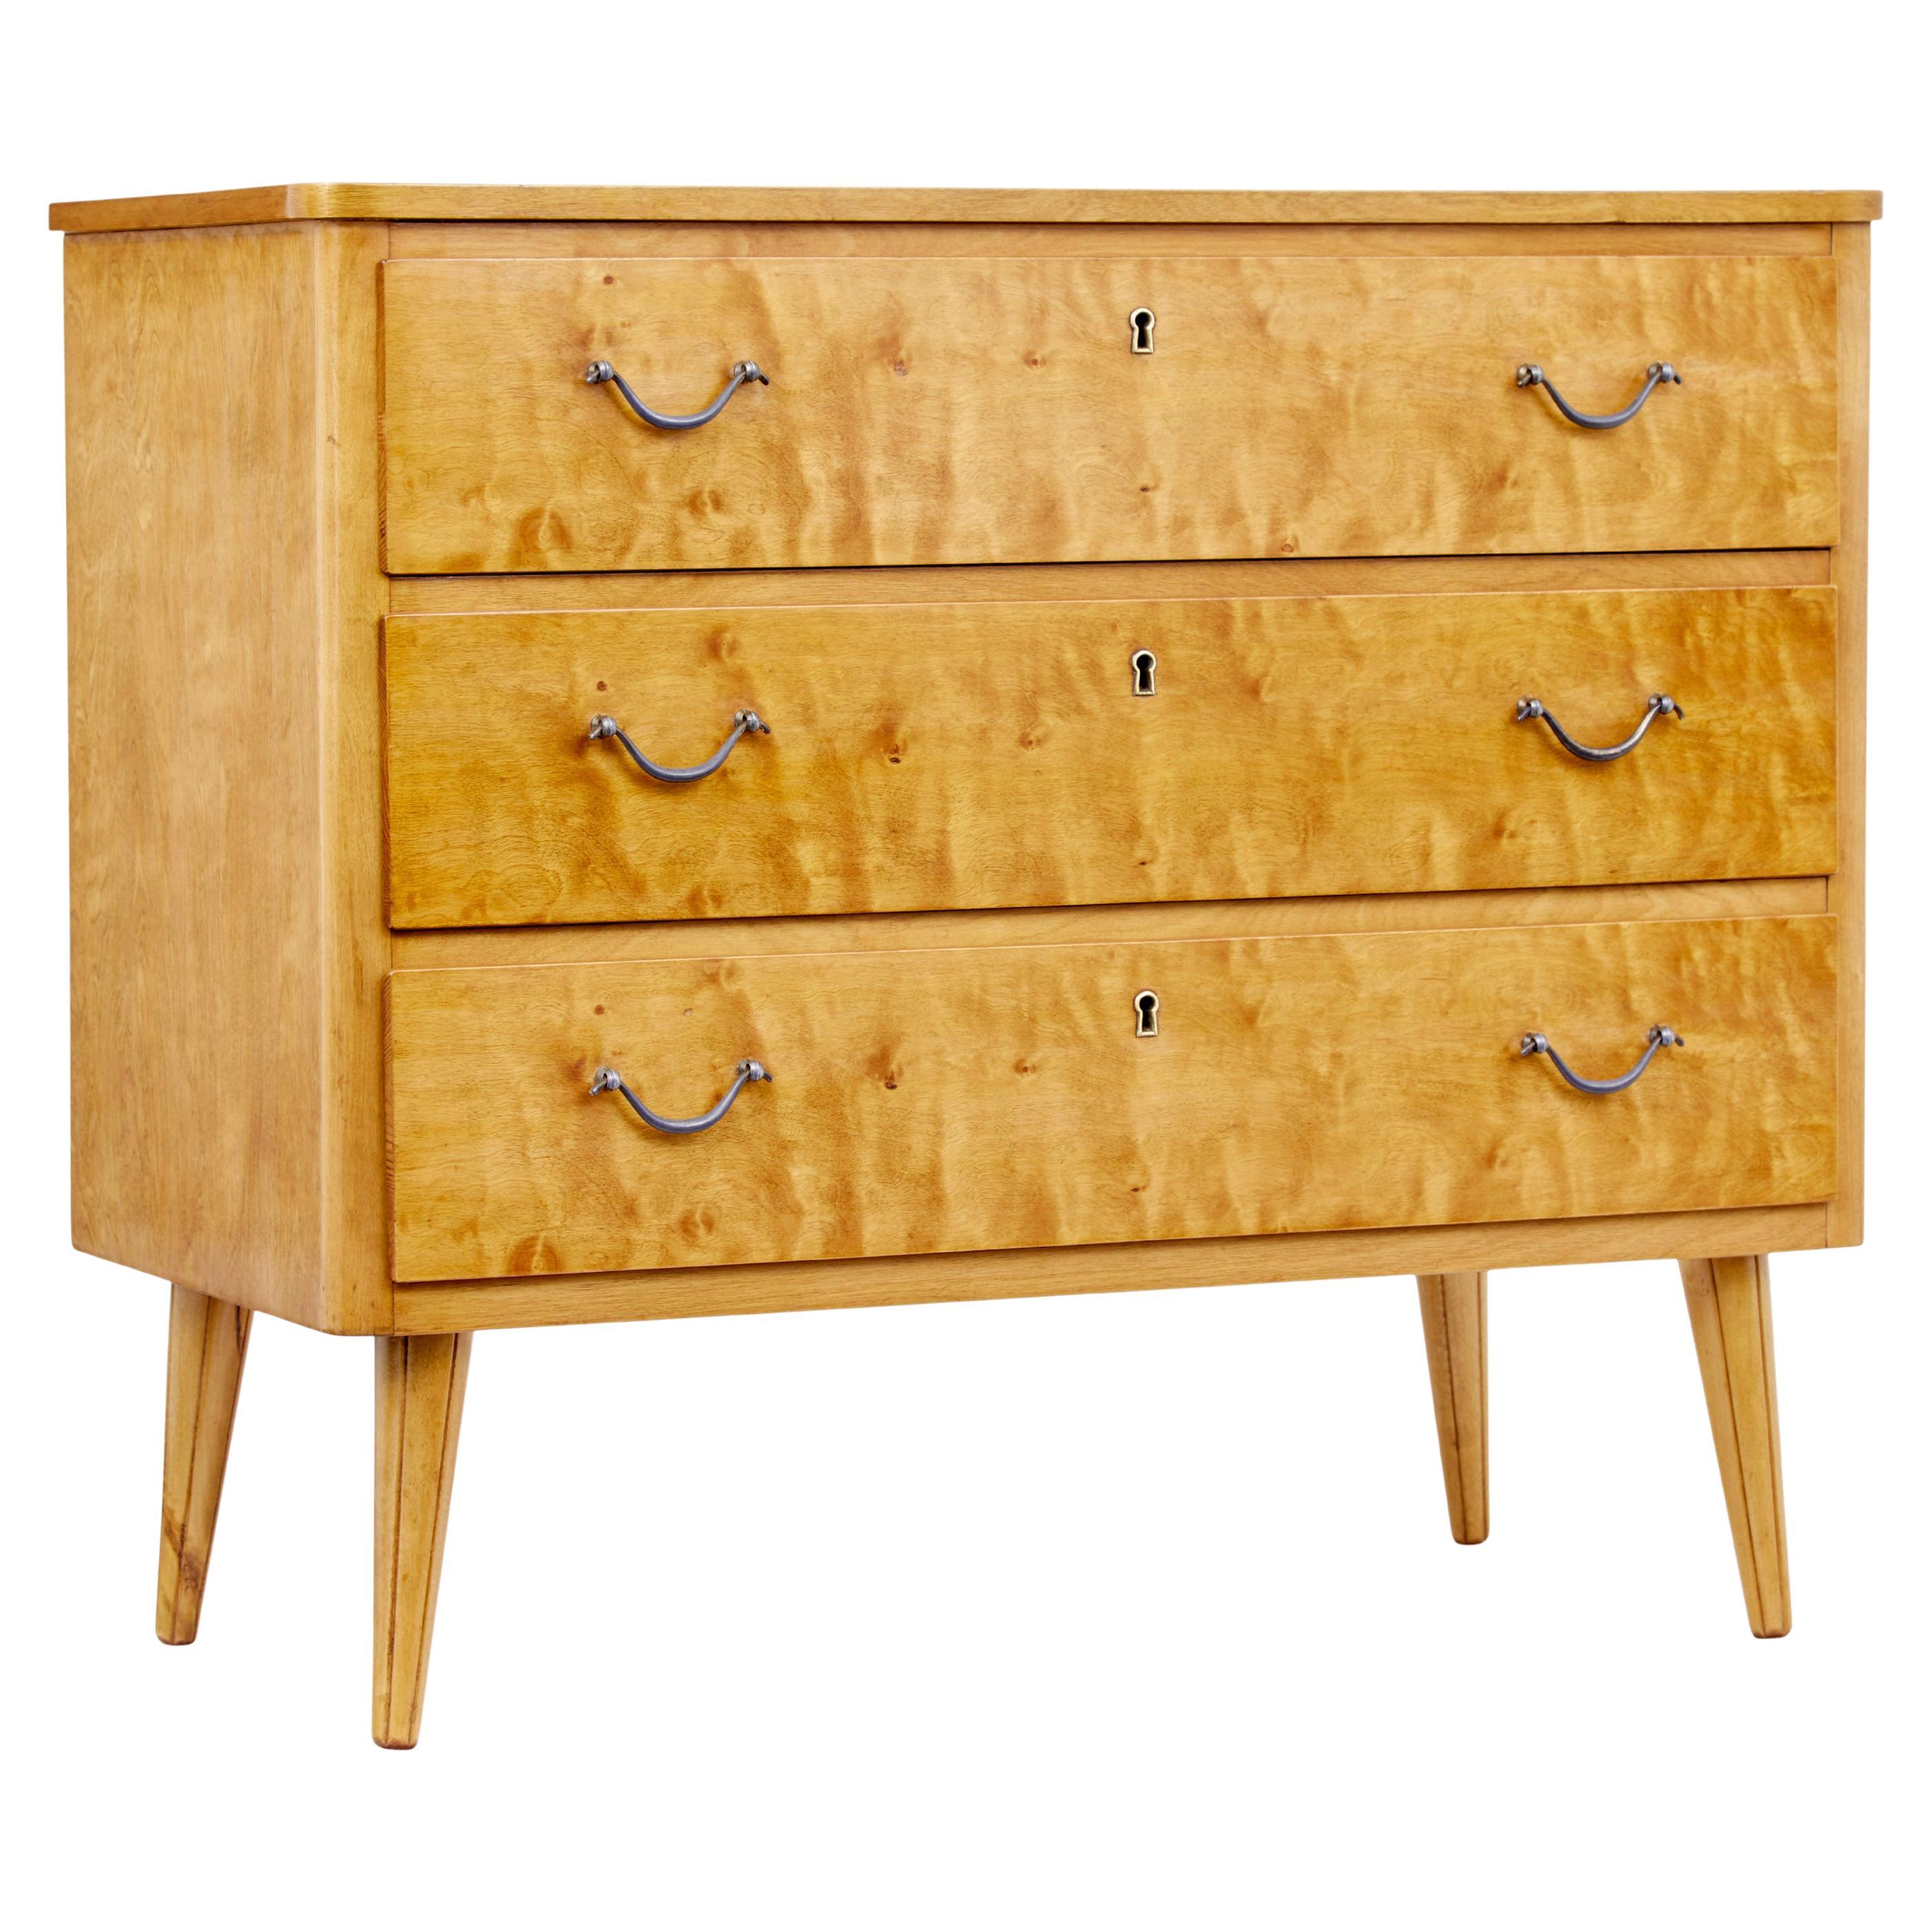 1960s Scandinavian Birch Chest of Drawers For Sale